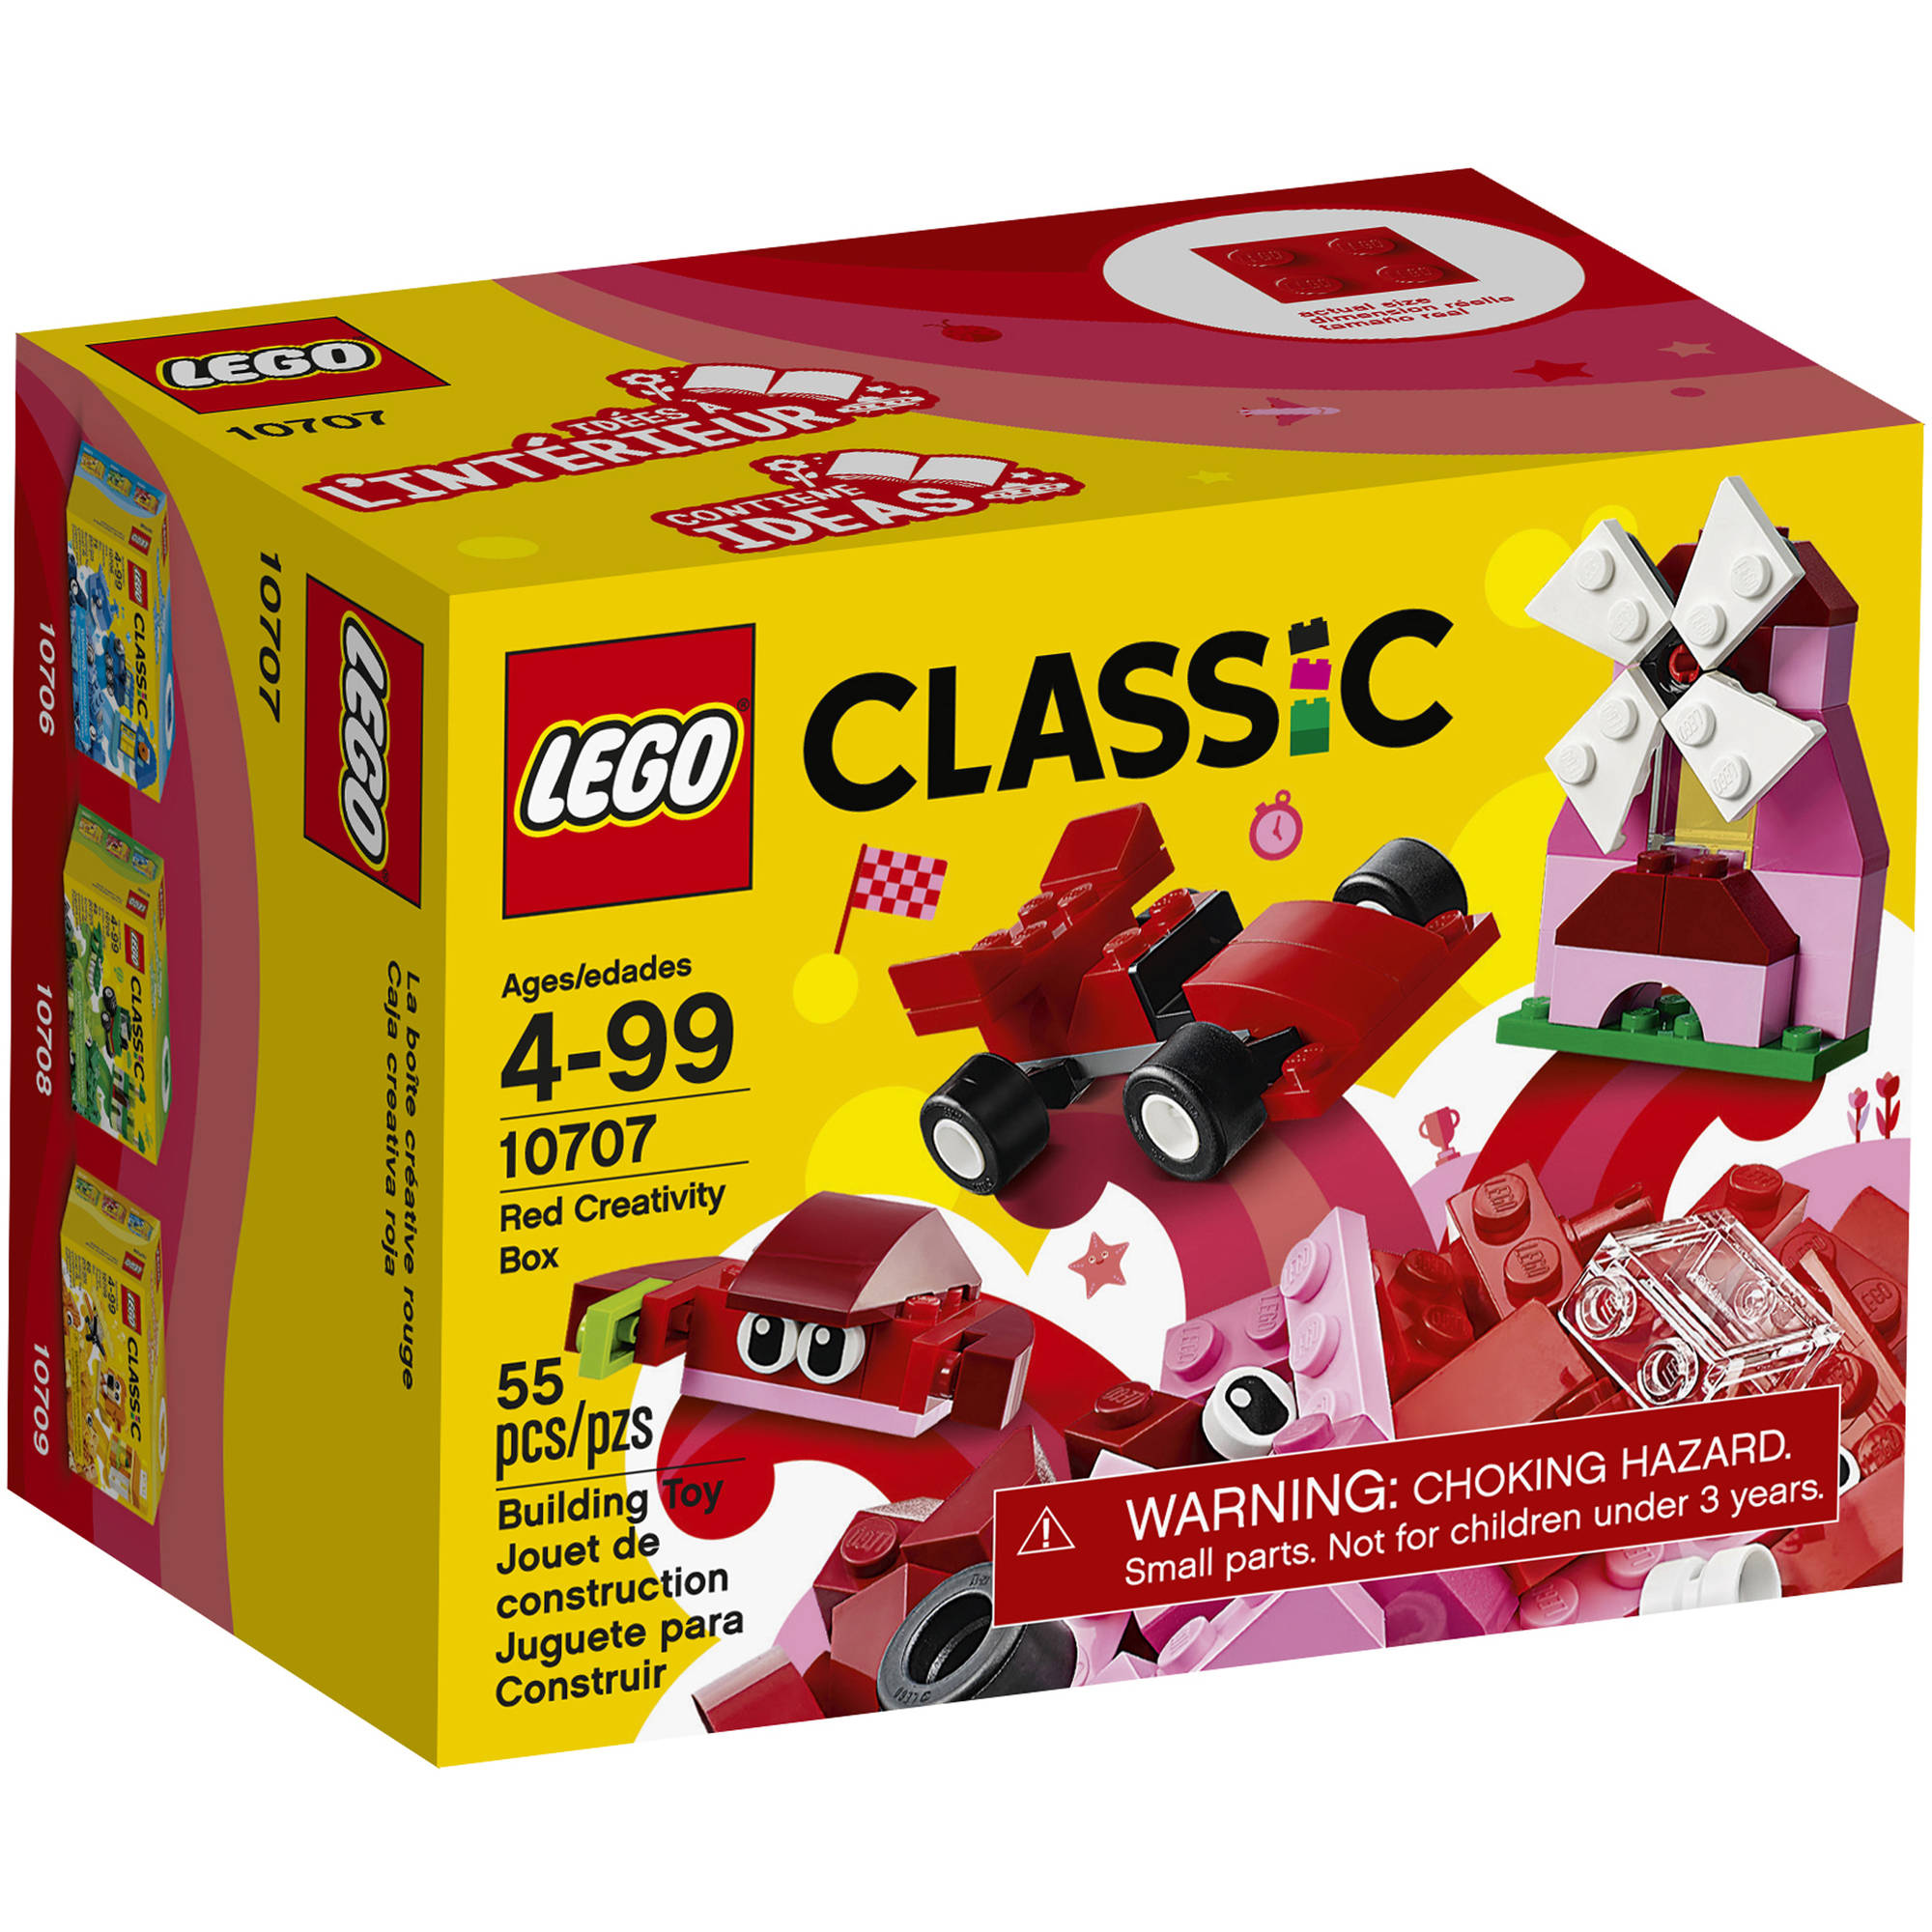 LEGO Classic Creativity Box, Red 10707 (55 Pieces) - image 1 of 8